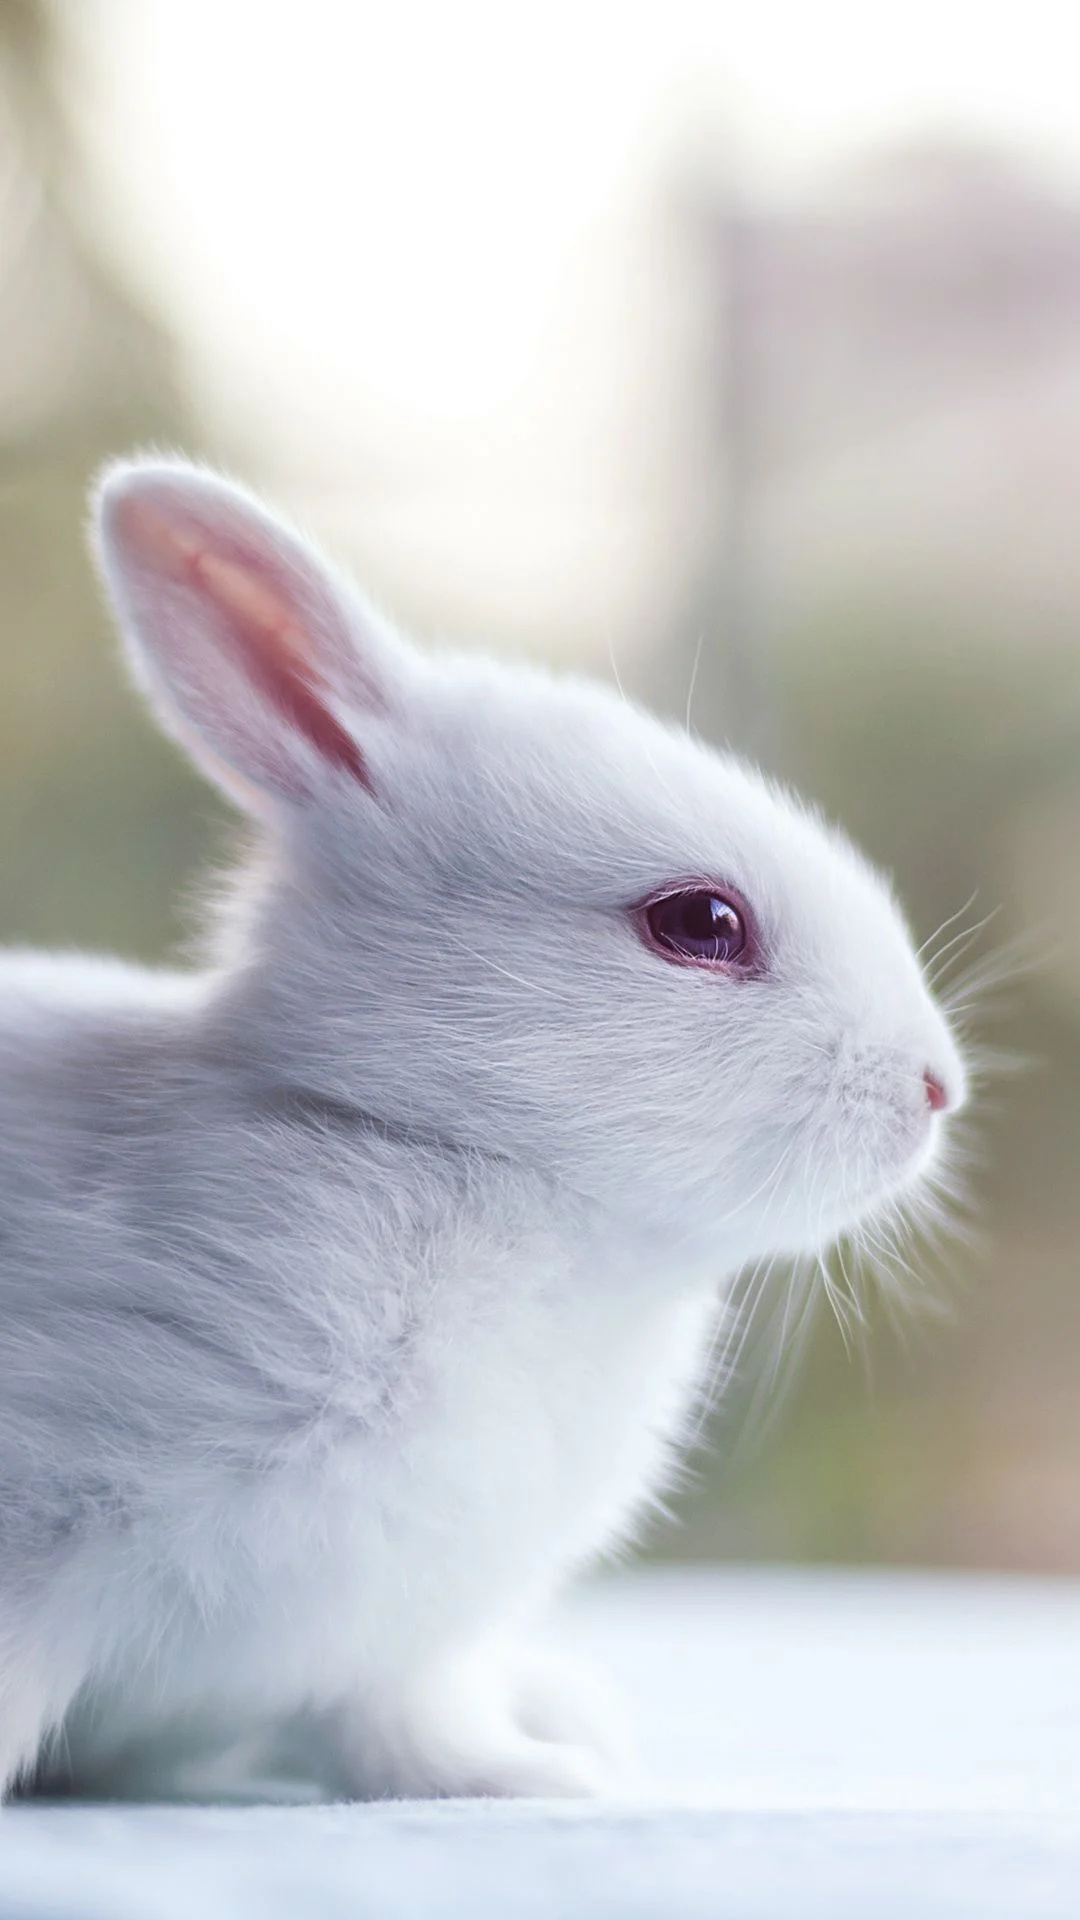 Bunny: White rabbit, A small furry animal with long ears. 1080x1920 Full HD Wallpaper.